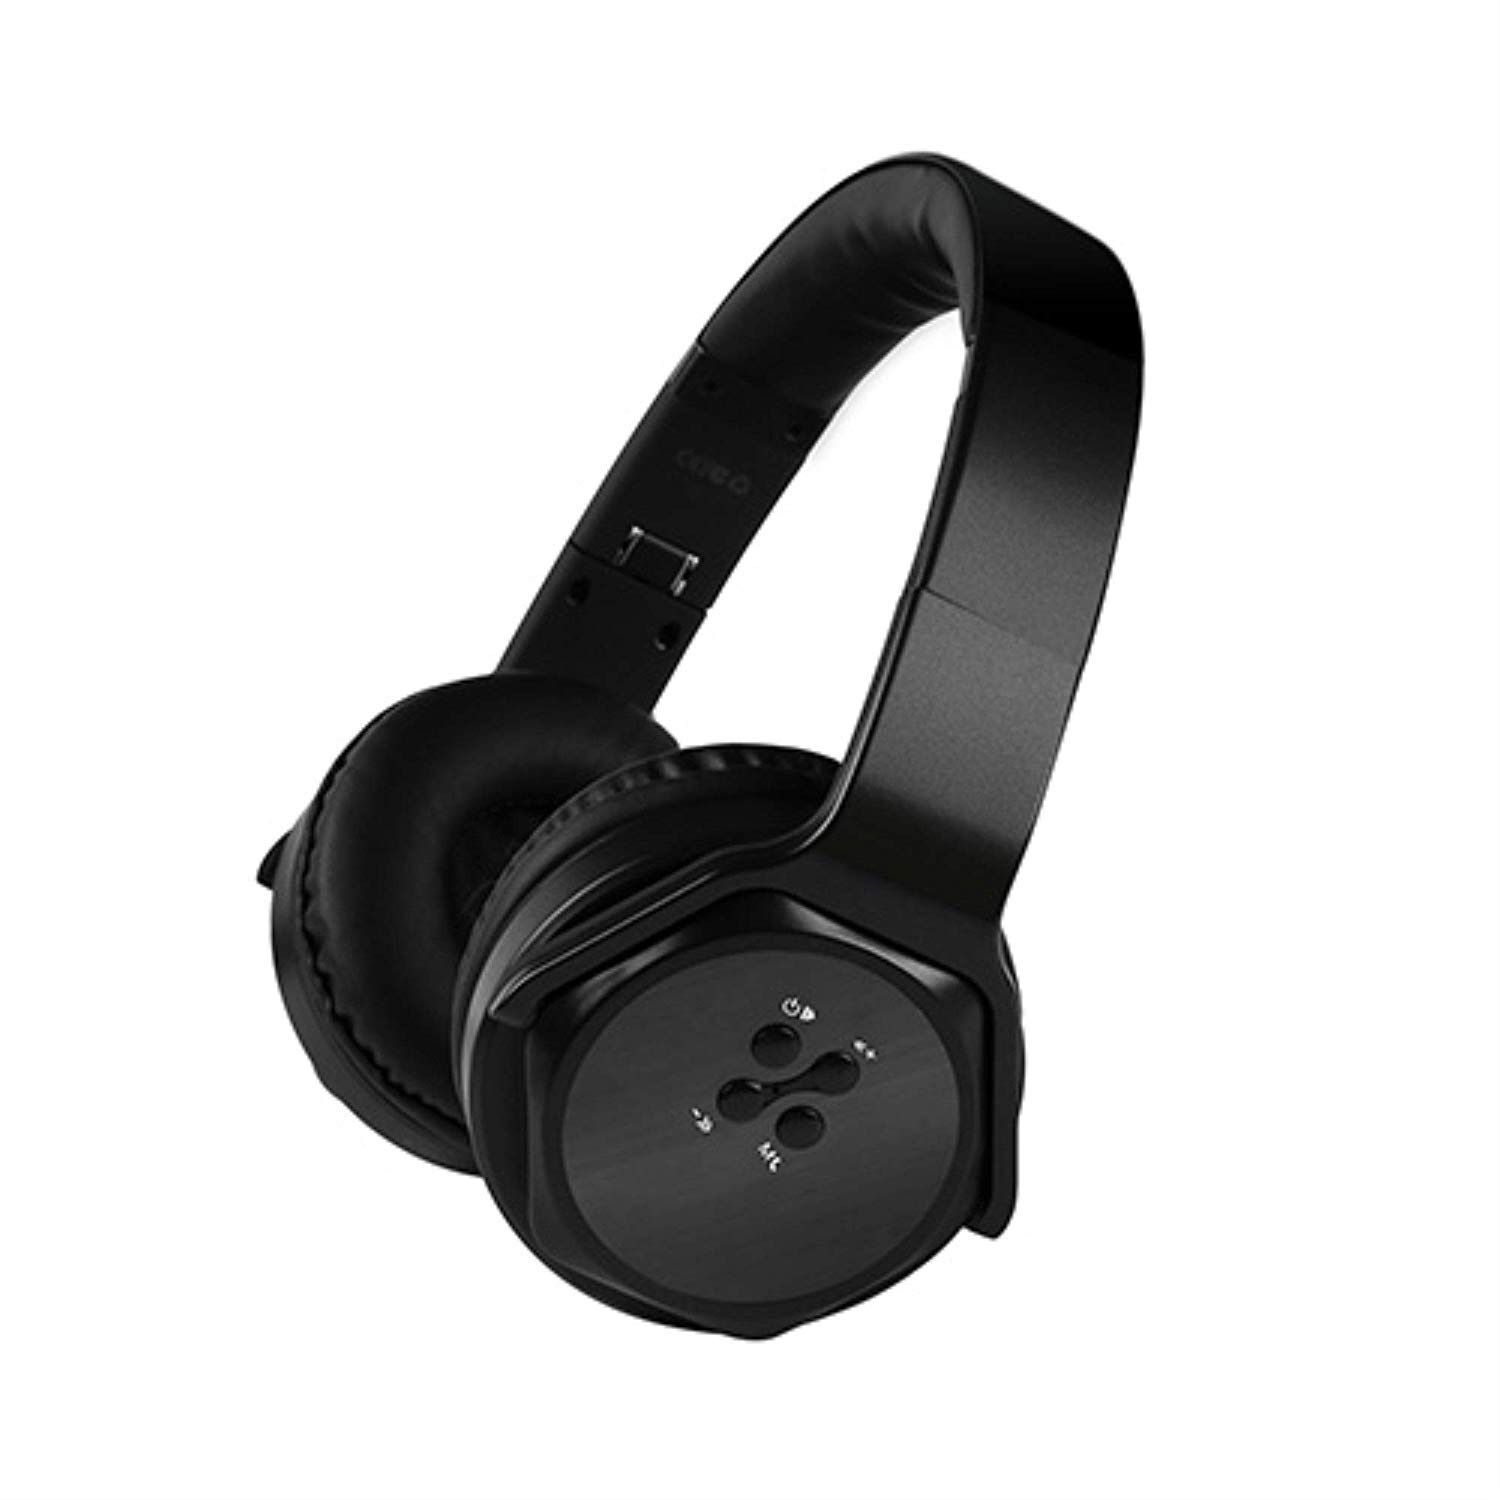 Kocaso Noise Cancelling Wireless Headphones with Built in Speaker